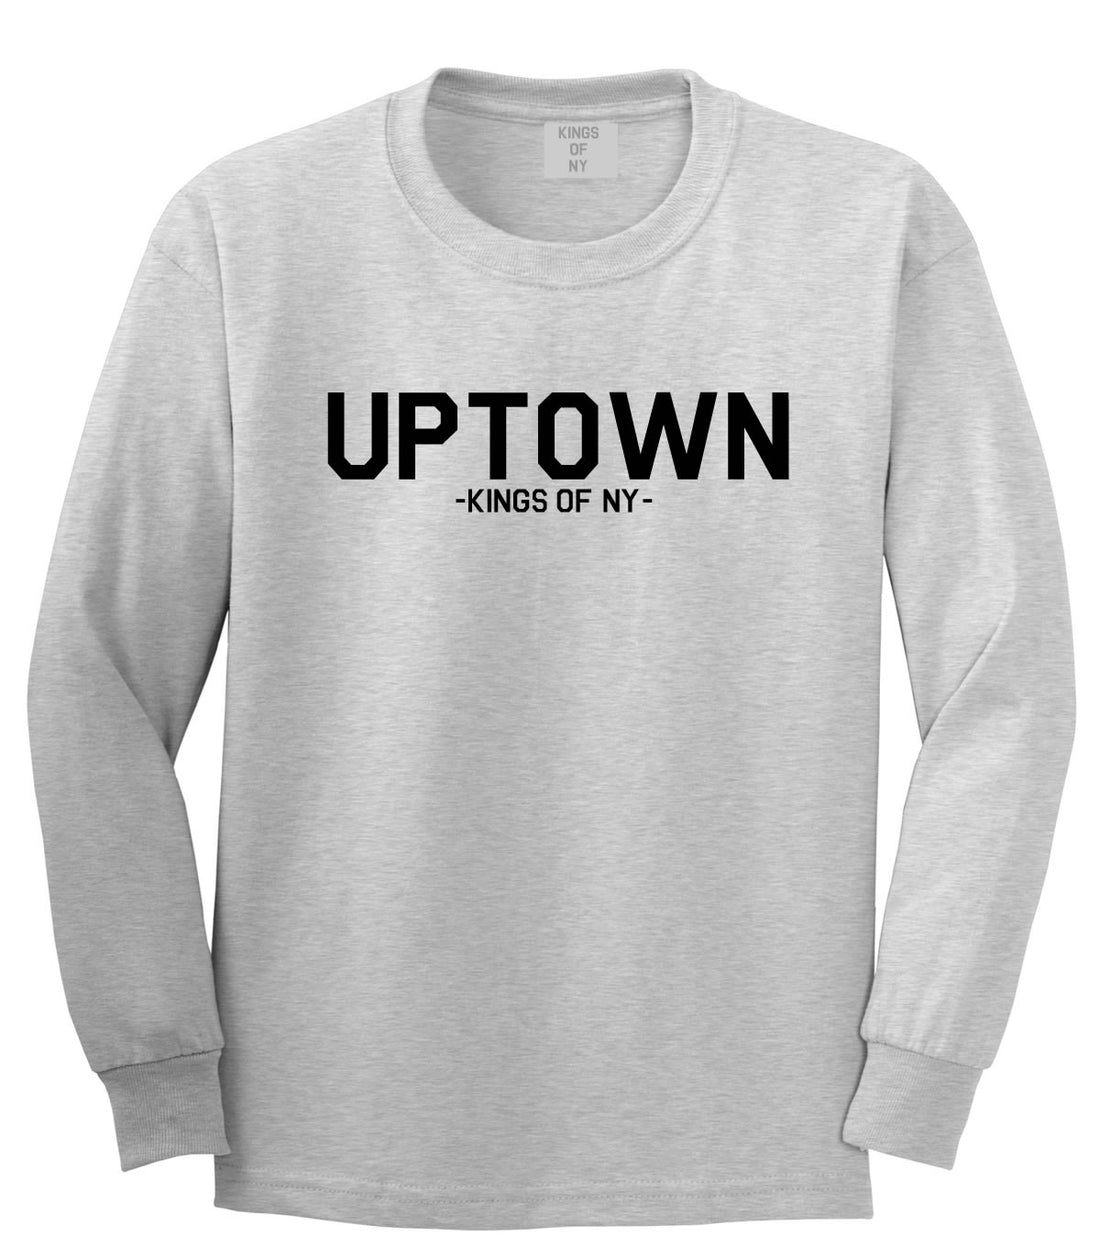 UPTOWN nyc New York Long Sleeve T-Shirt in Grey